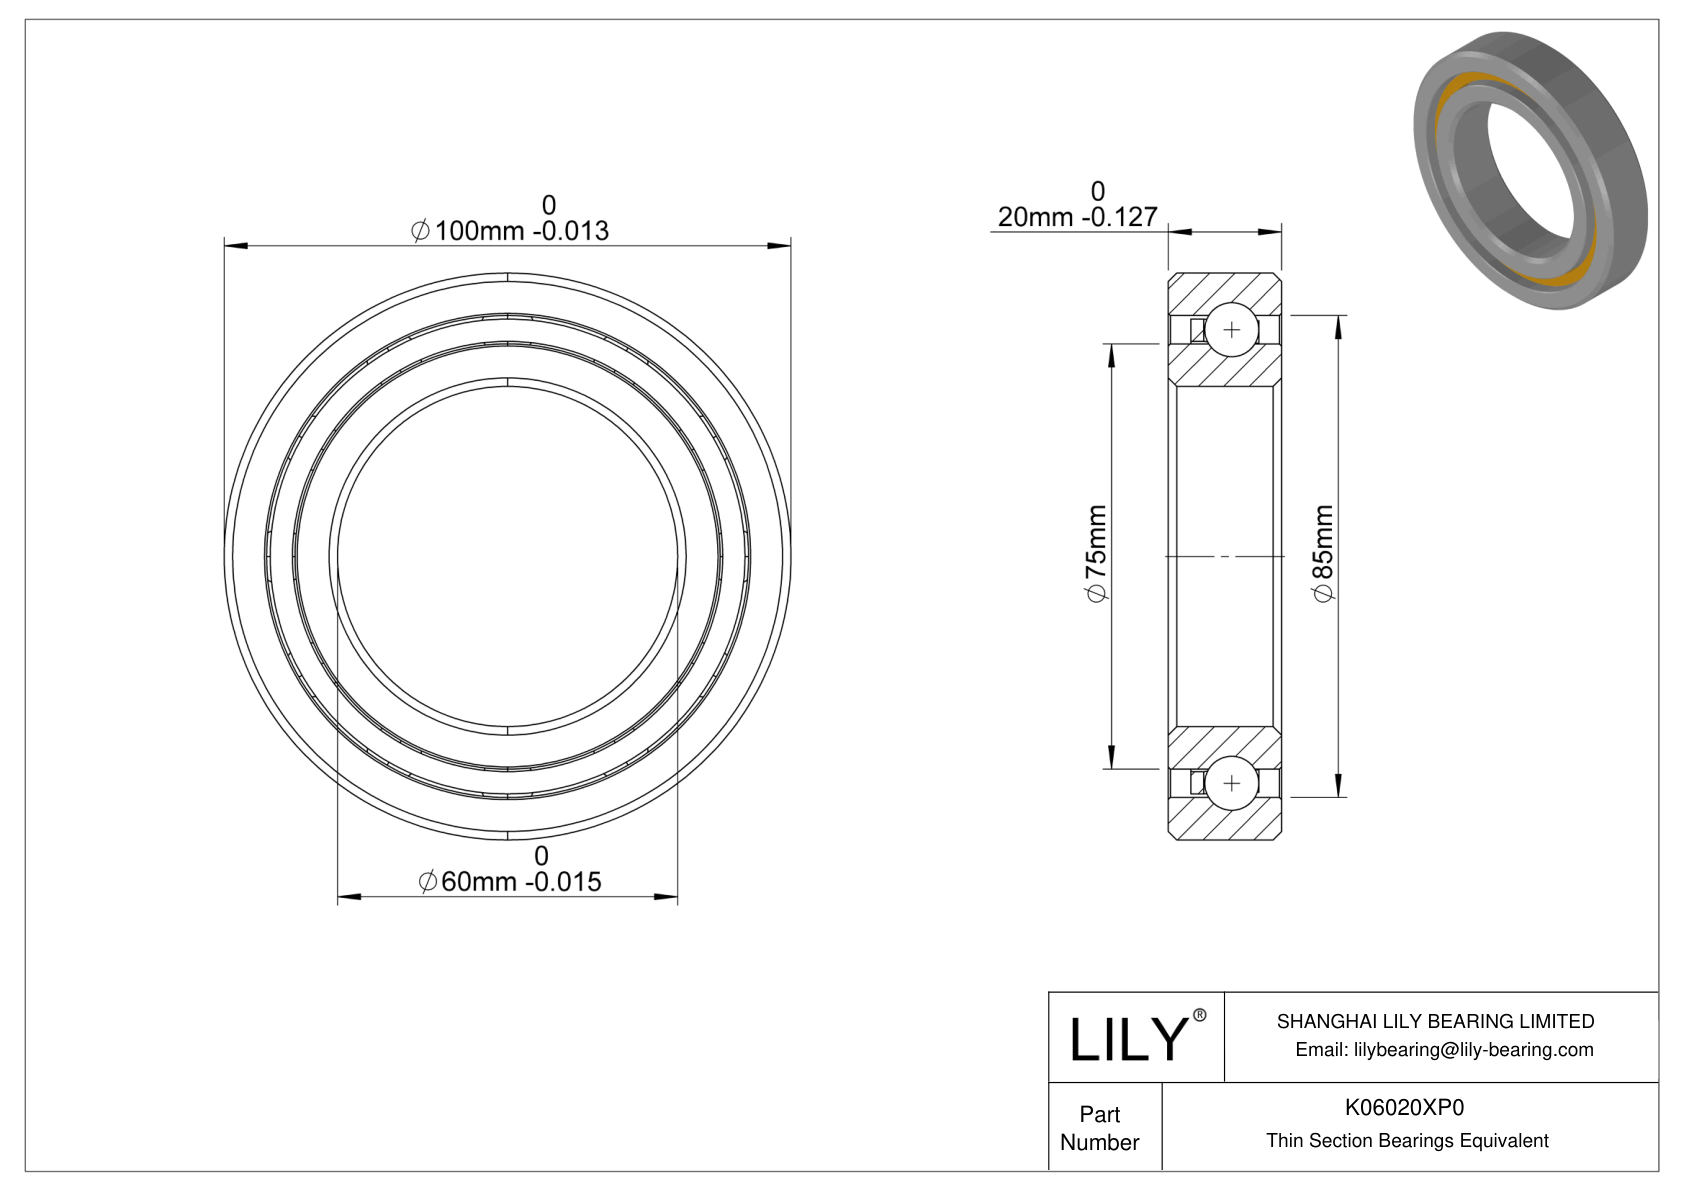 K06020XP0 Constant Section (CS) Bearings cad drawing